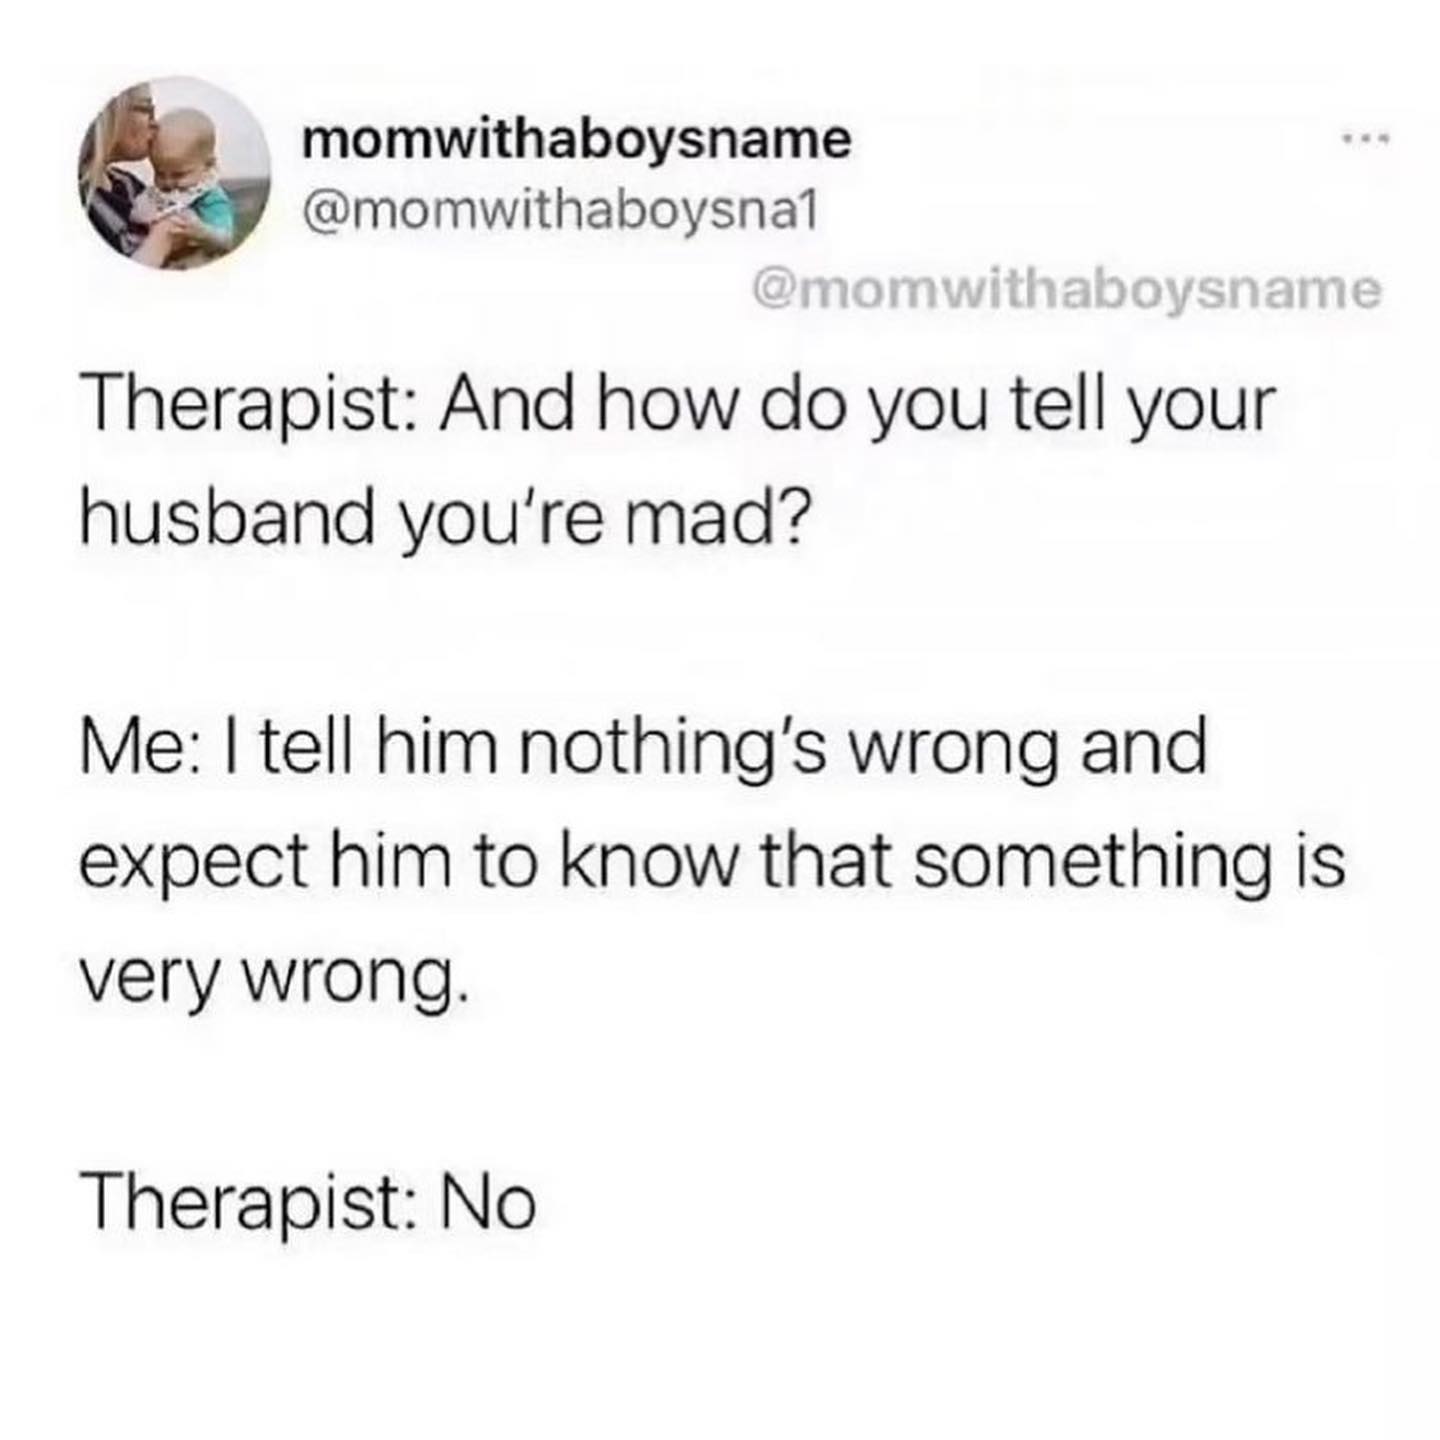 meme about wife telling therapist she doesn't tell her husband when she's mad and expects him to figure out why.